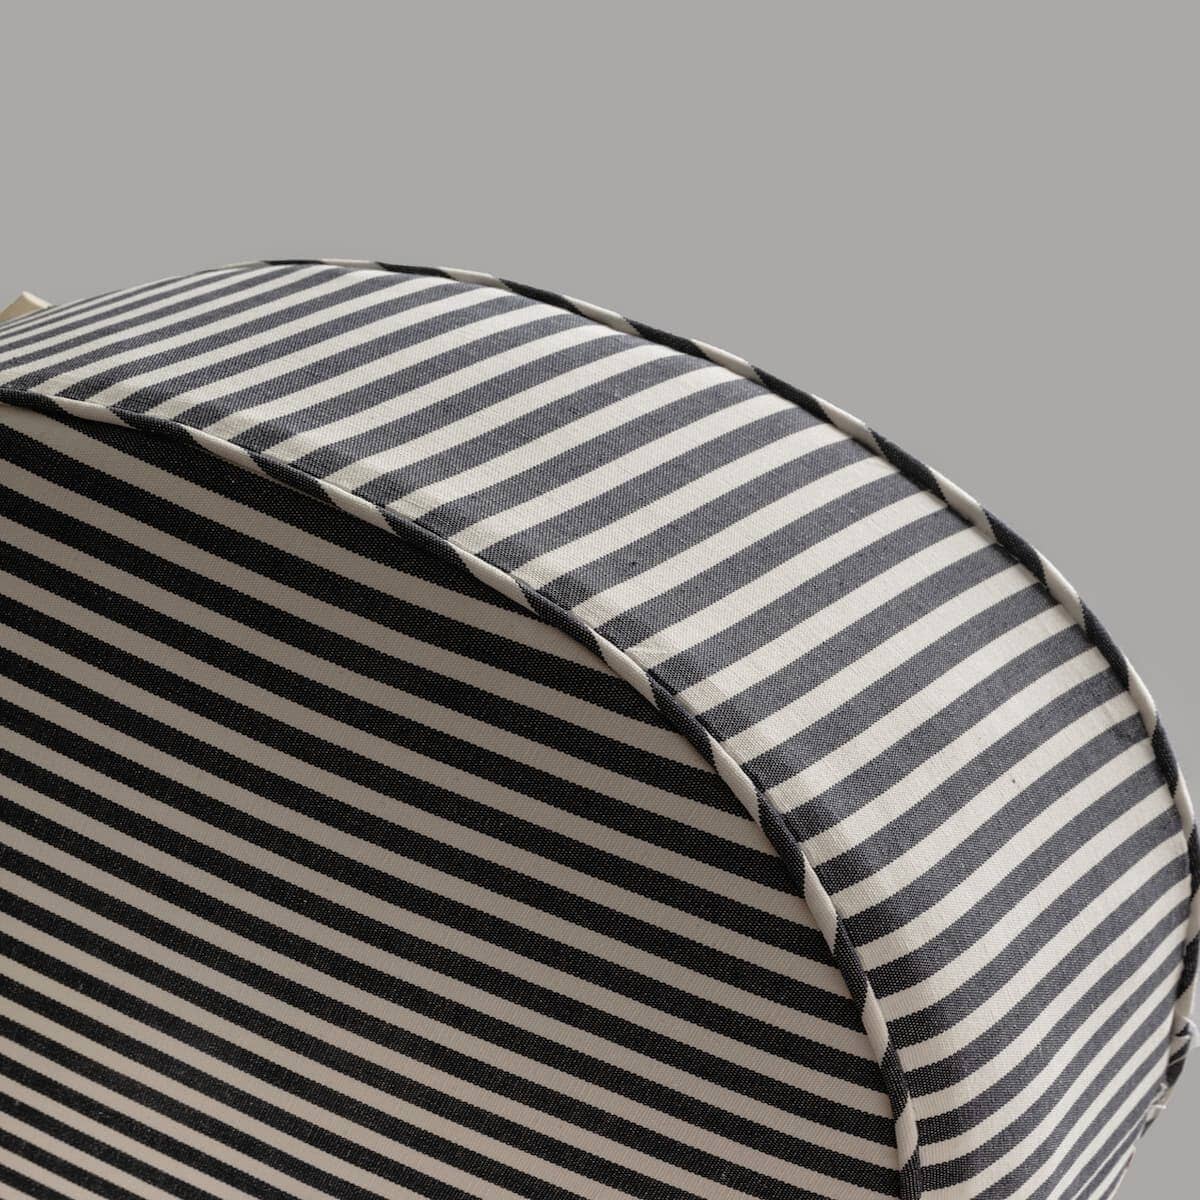 Zoomed in image of the rounded edge of the pillow